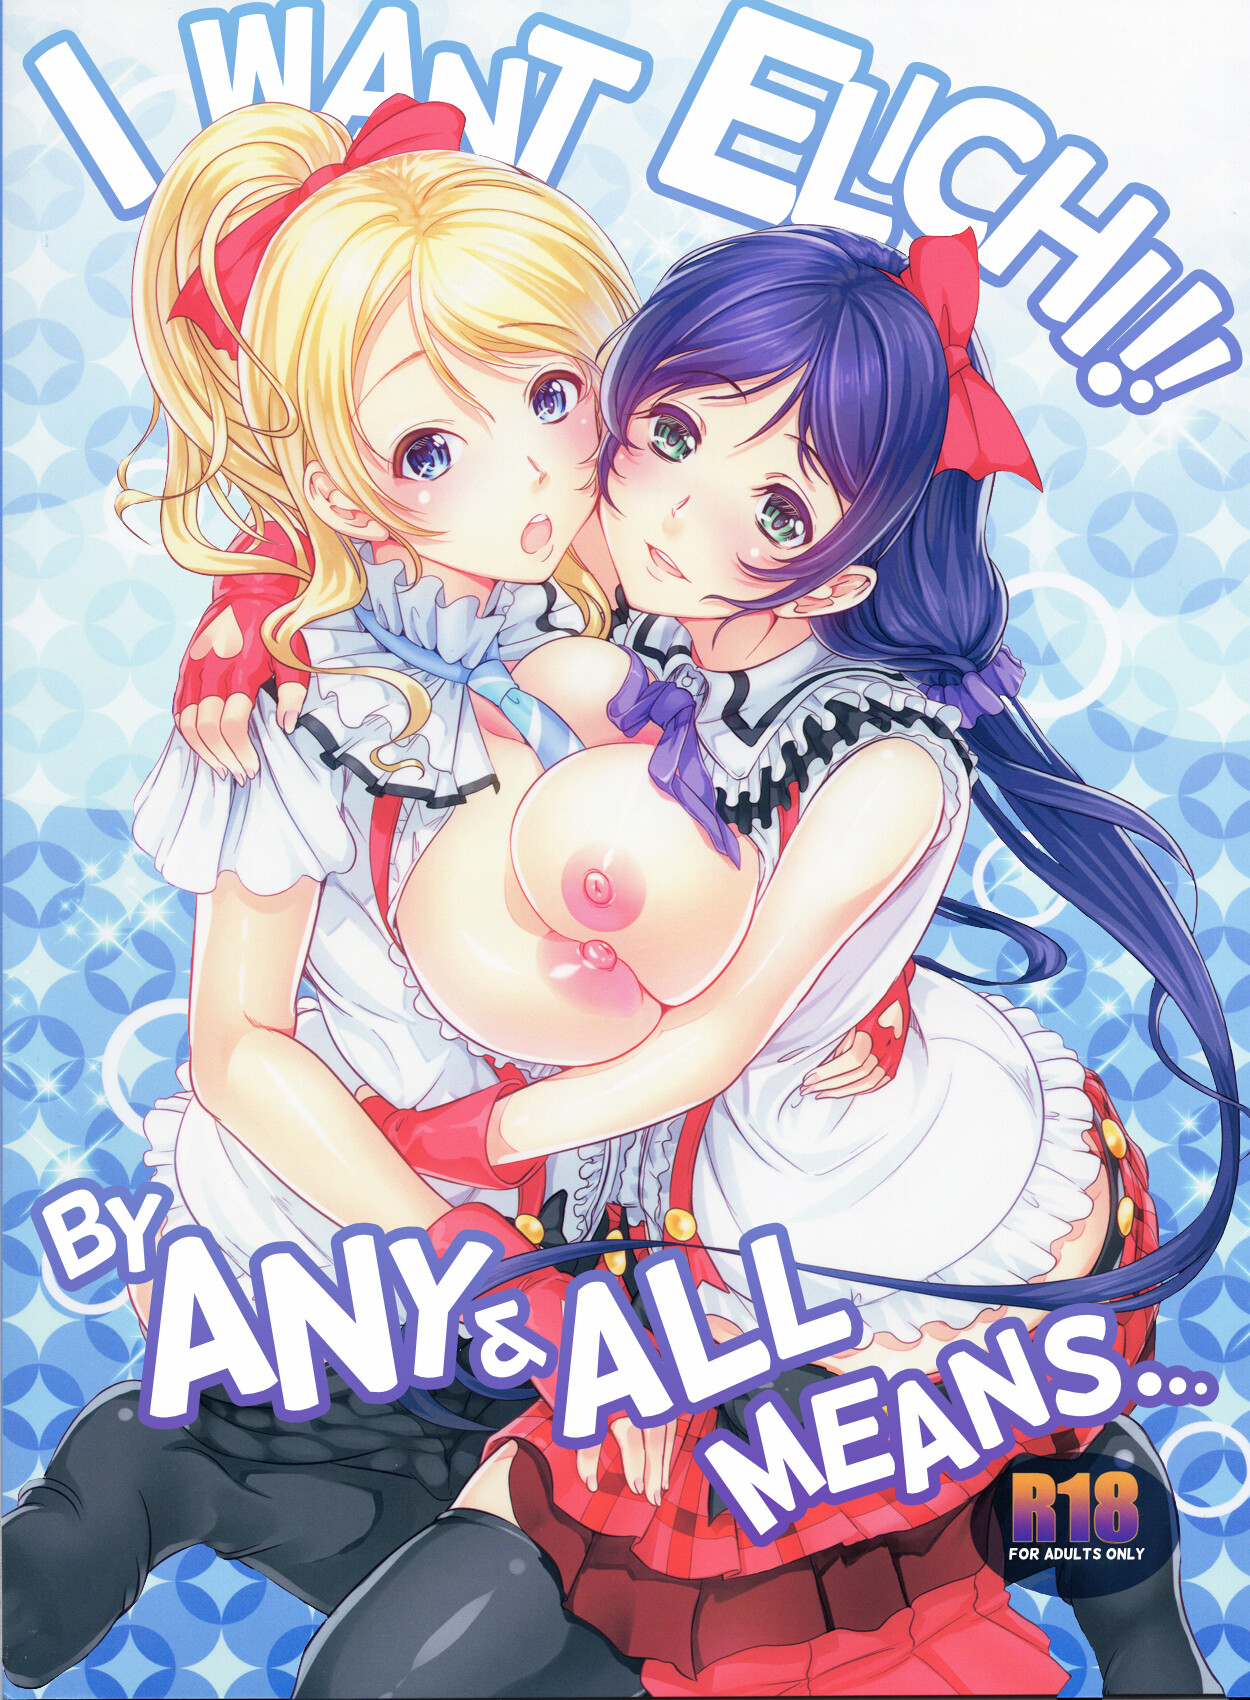 Hentai Manga Comic-I Want Elichi!! By Any and All Means...-Read-1